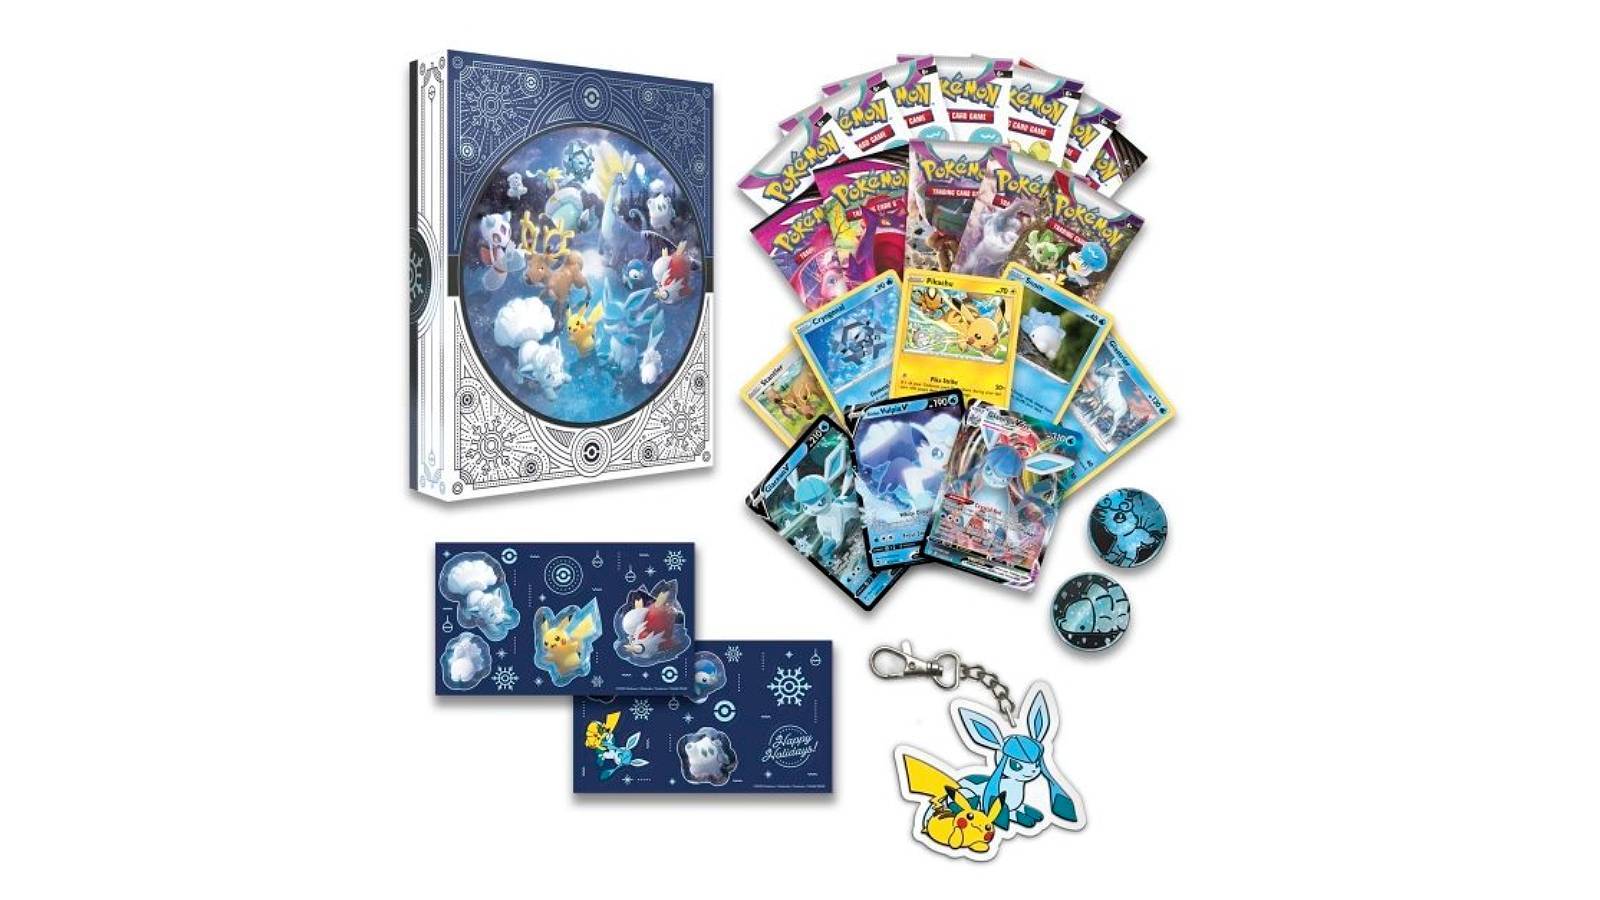 The contents of a Pokemon Holiday Calendar showing stickers, a key chain with Pikachu and Glaceon, Pokemon coins, and sealed packets of cards